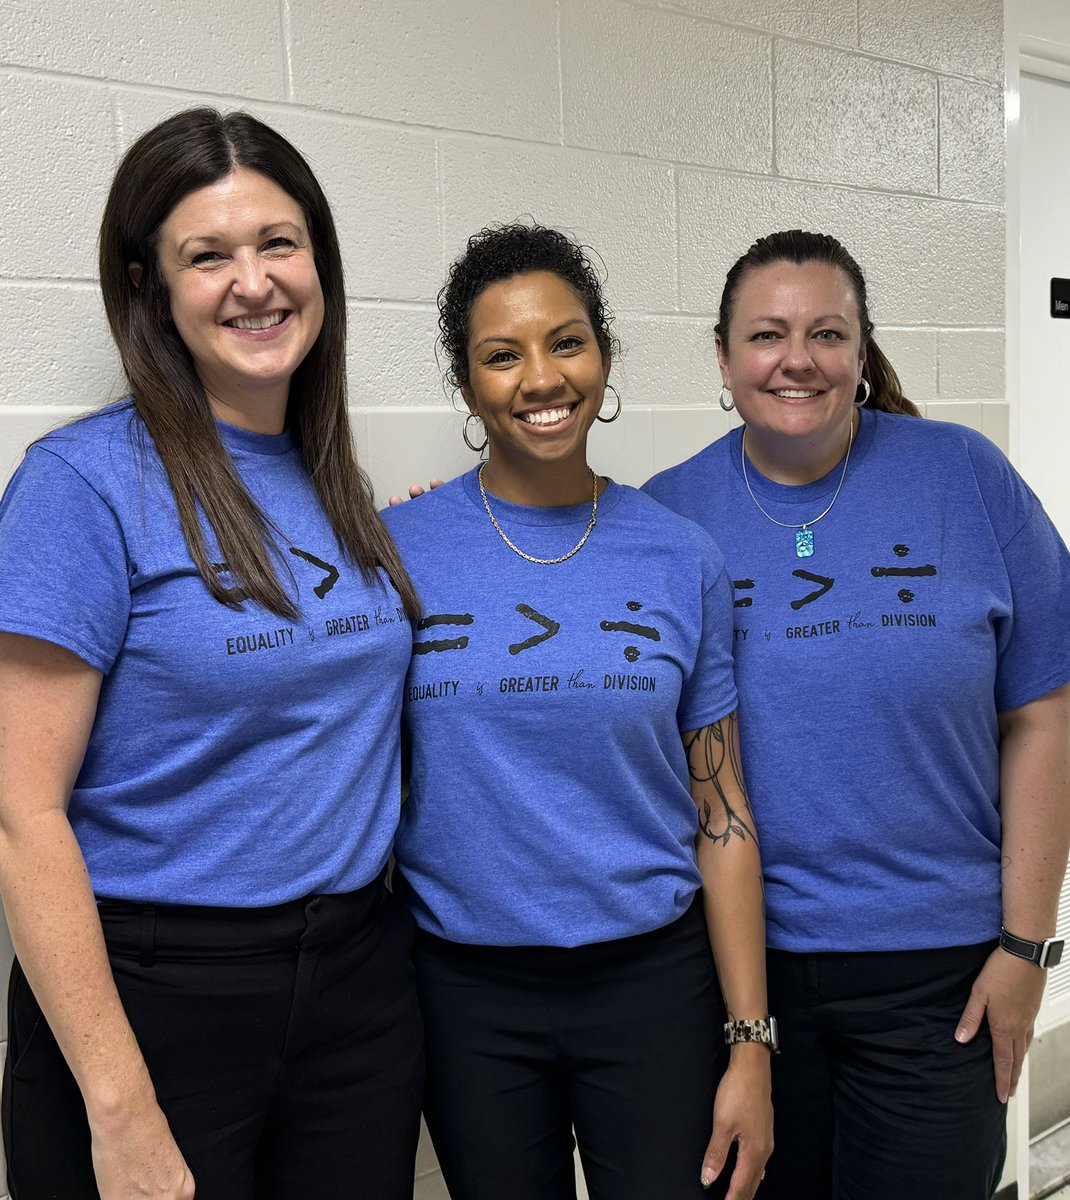 The elementary math C&I team showing love for all our students and teachers during the Math EOG today! #equalityisgreaterthandivision
@LisaJohnsonEDU @bnewellmath @CumberlandCoSch